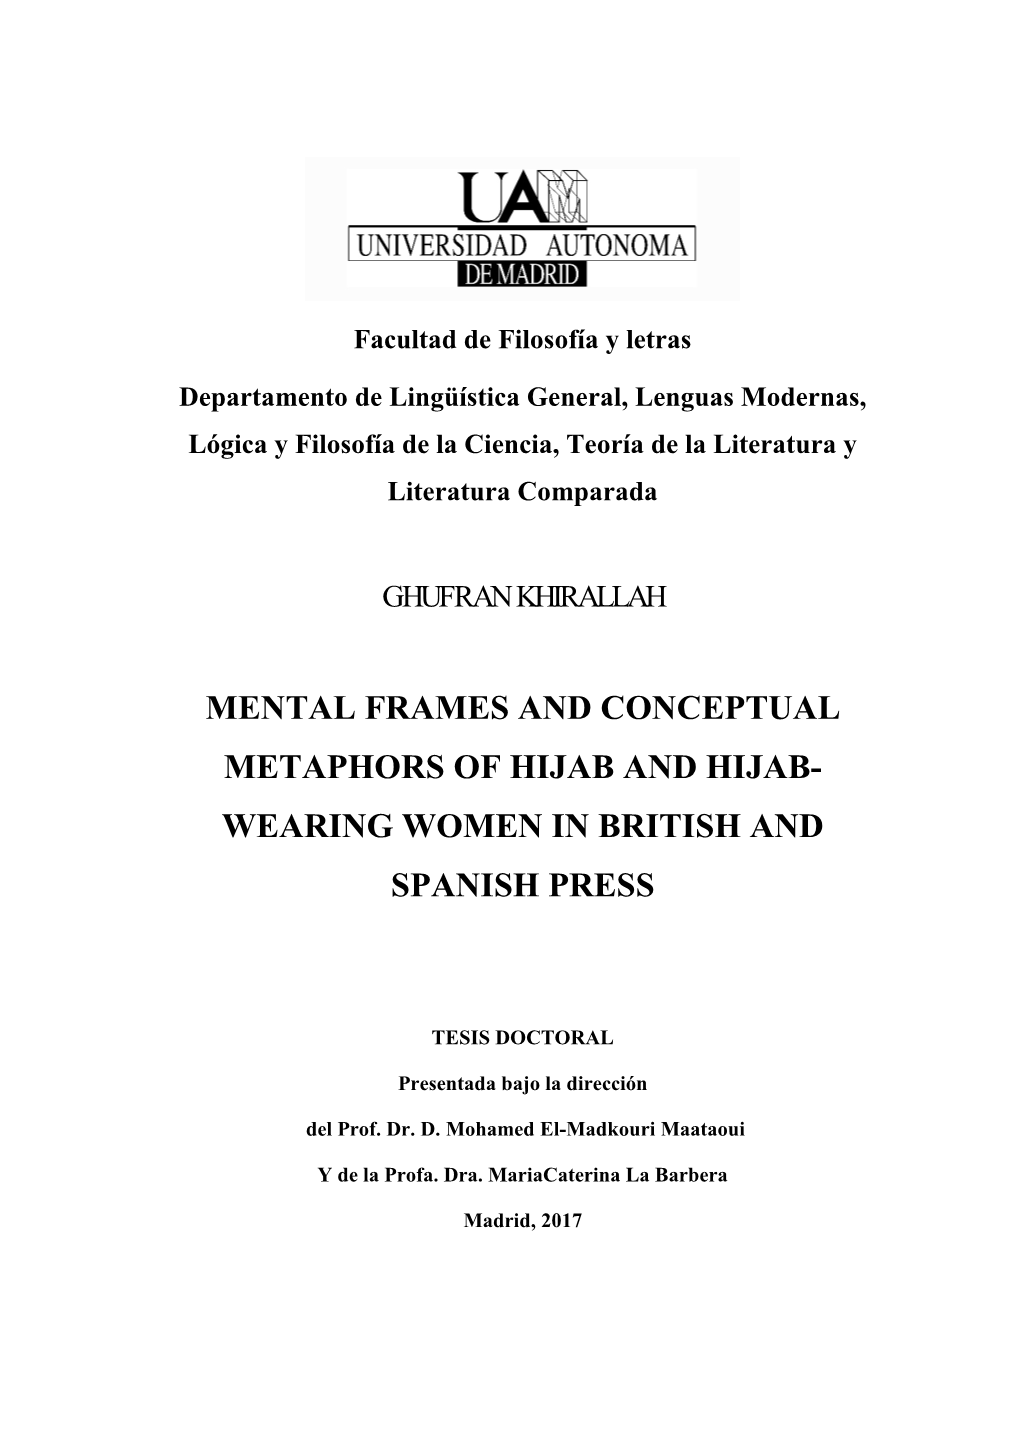 Mental Frames and Conceptual Metaphors of Hijab and Hijab- Wearing Women in British and Spanish Press